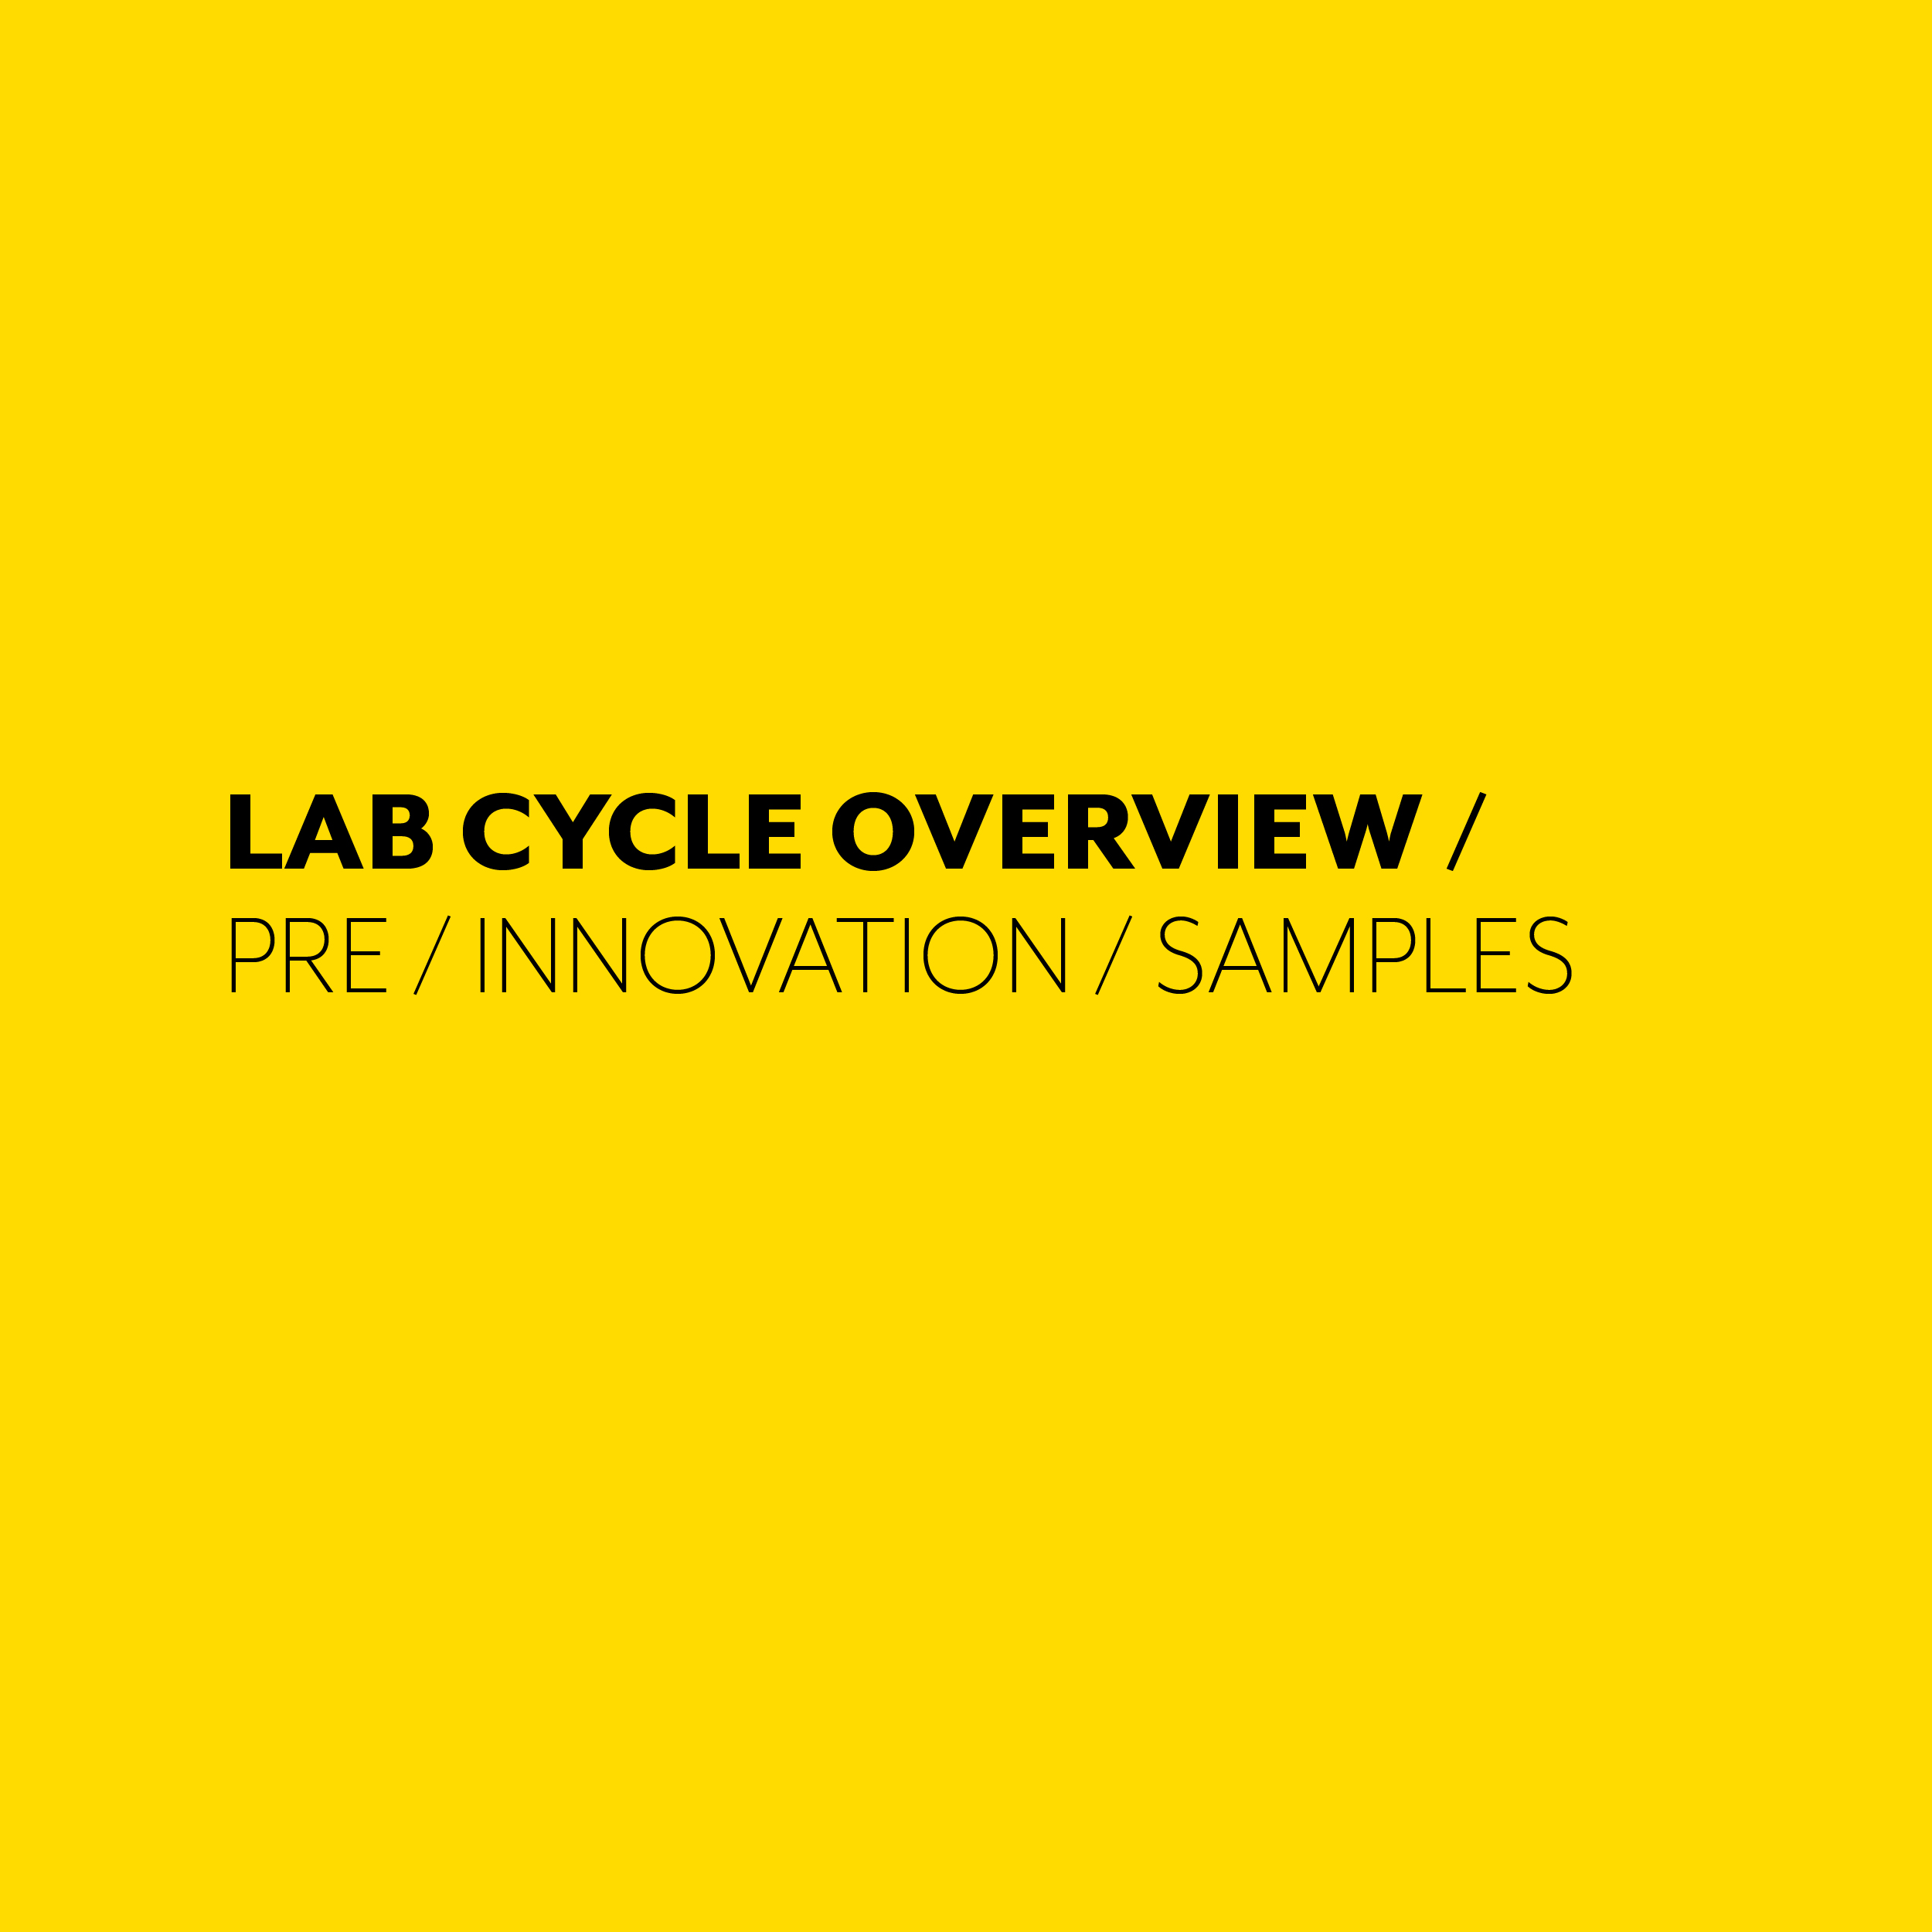 LAB CYCLE OVERVIEW.jpg